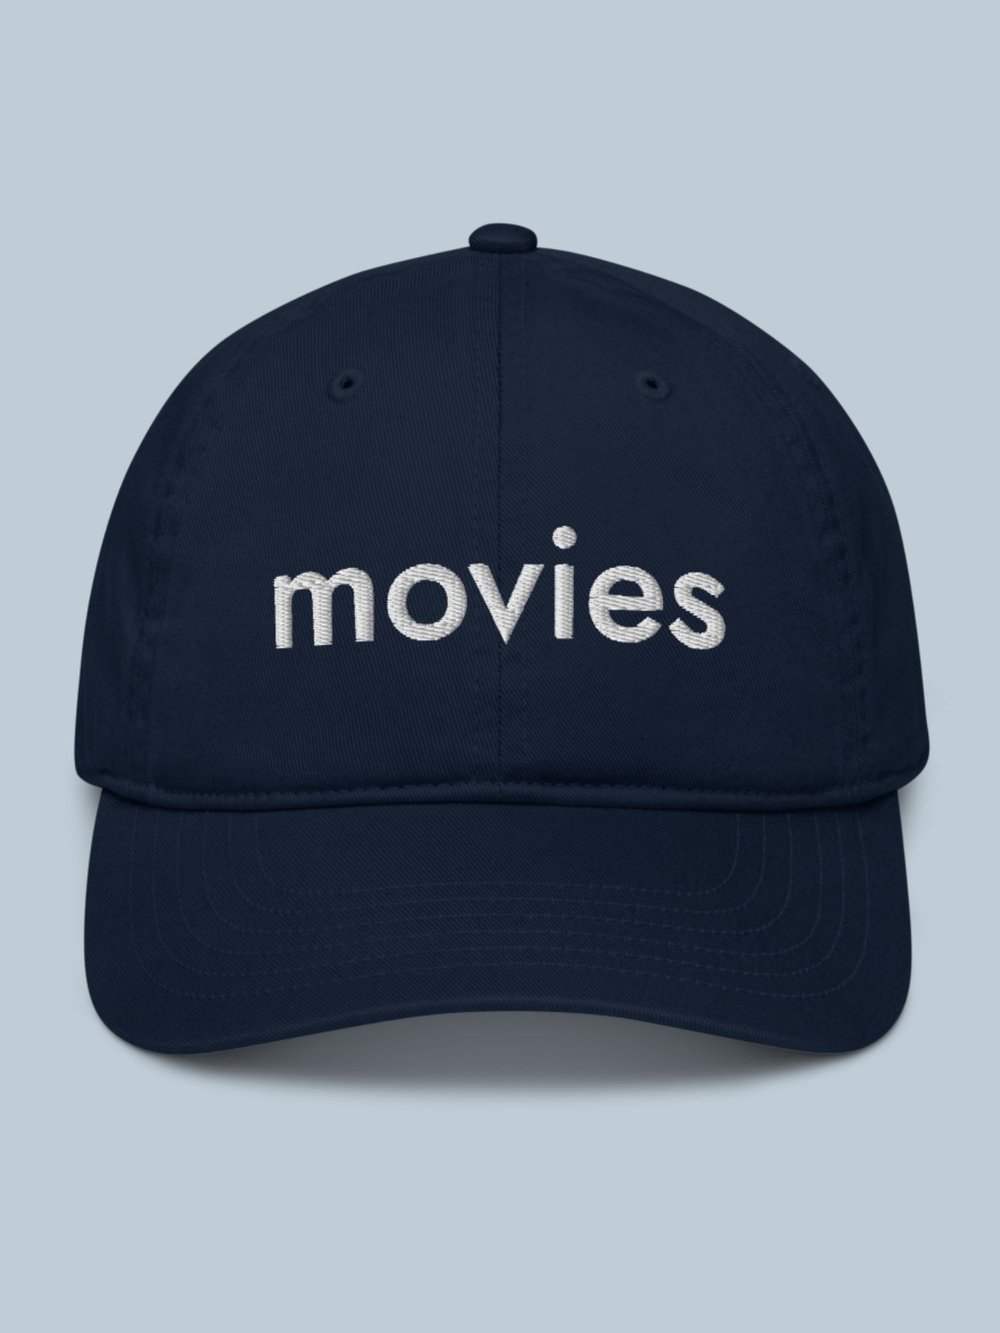 That Says Movies On — Movies Brand